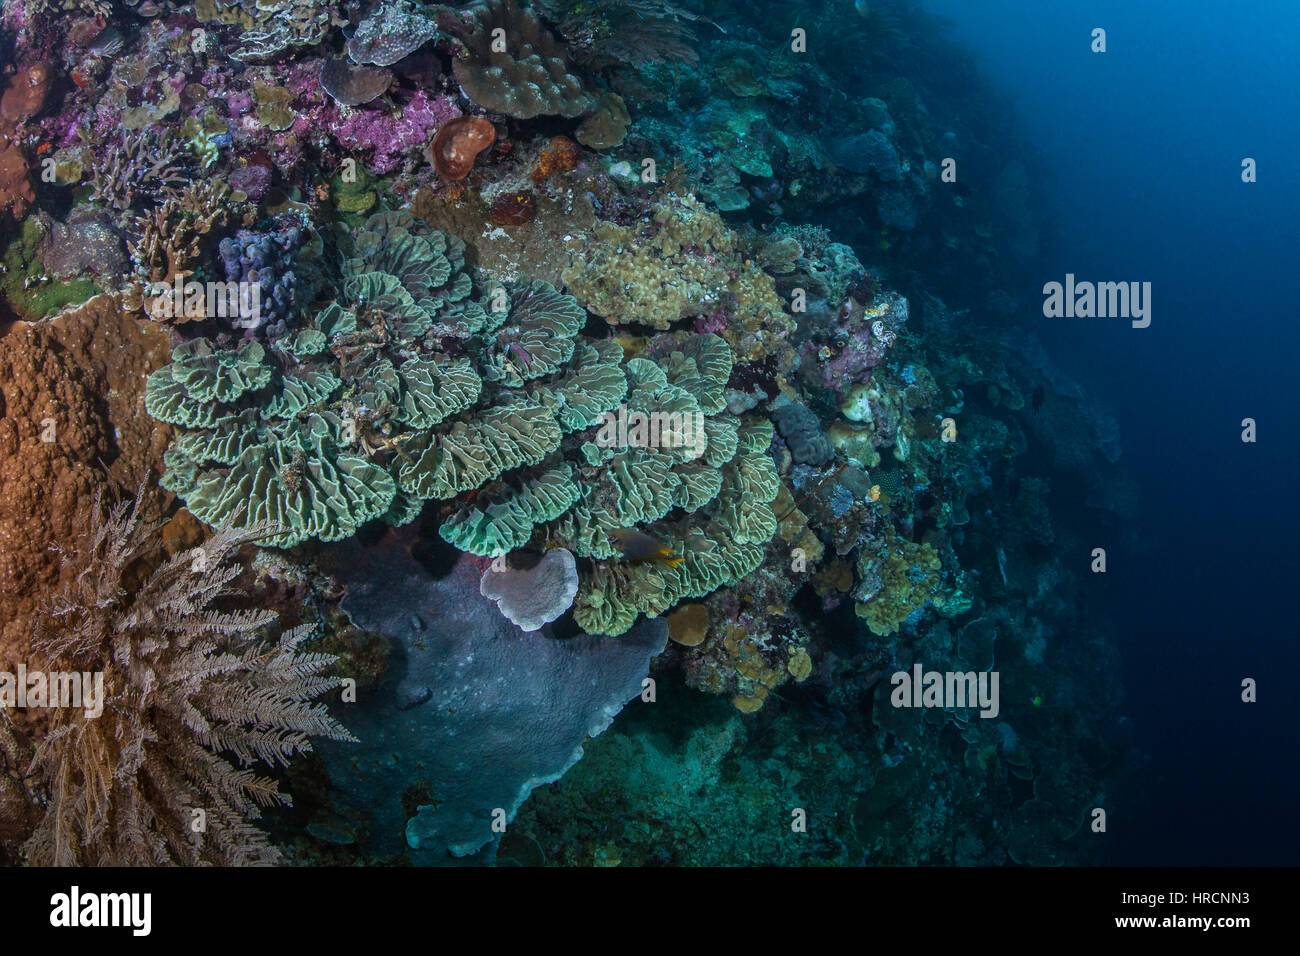 Seascape of deep sea coral reef with a close-focus wide-angle view of bright green hard corals (Pectinia paeonia) on a steep wall. Bunaken Island, Ind Stock Photo